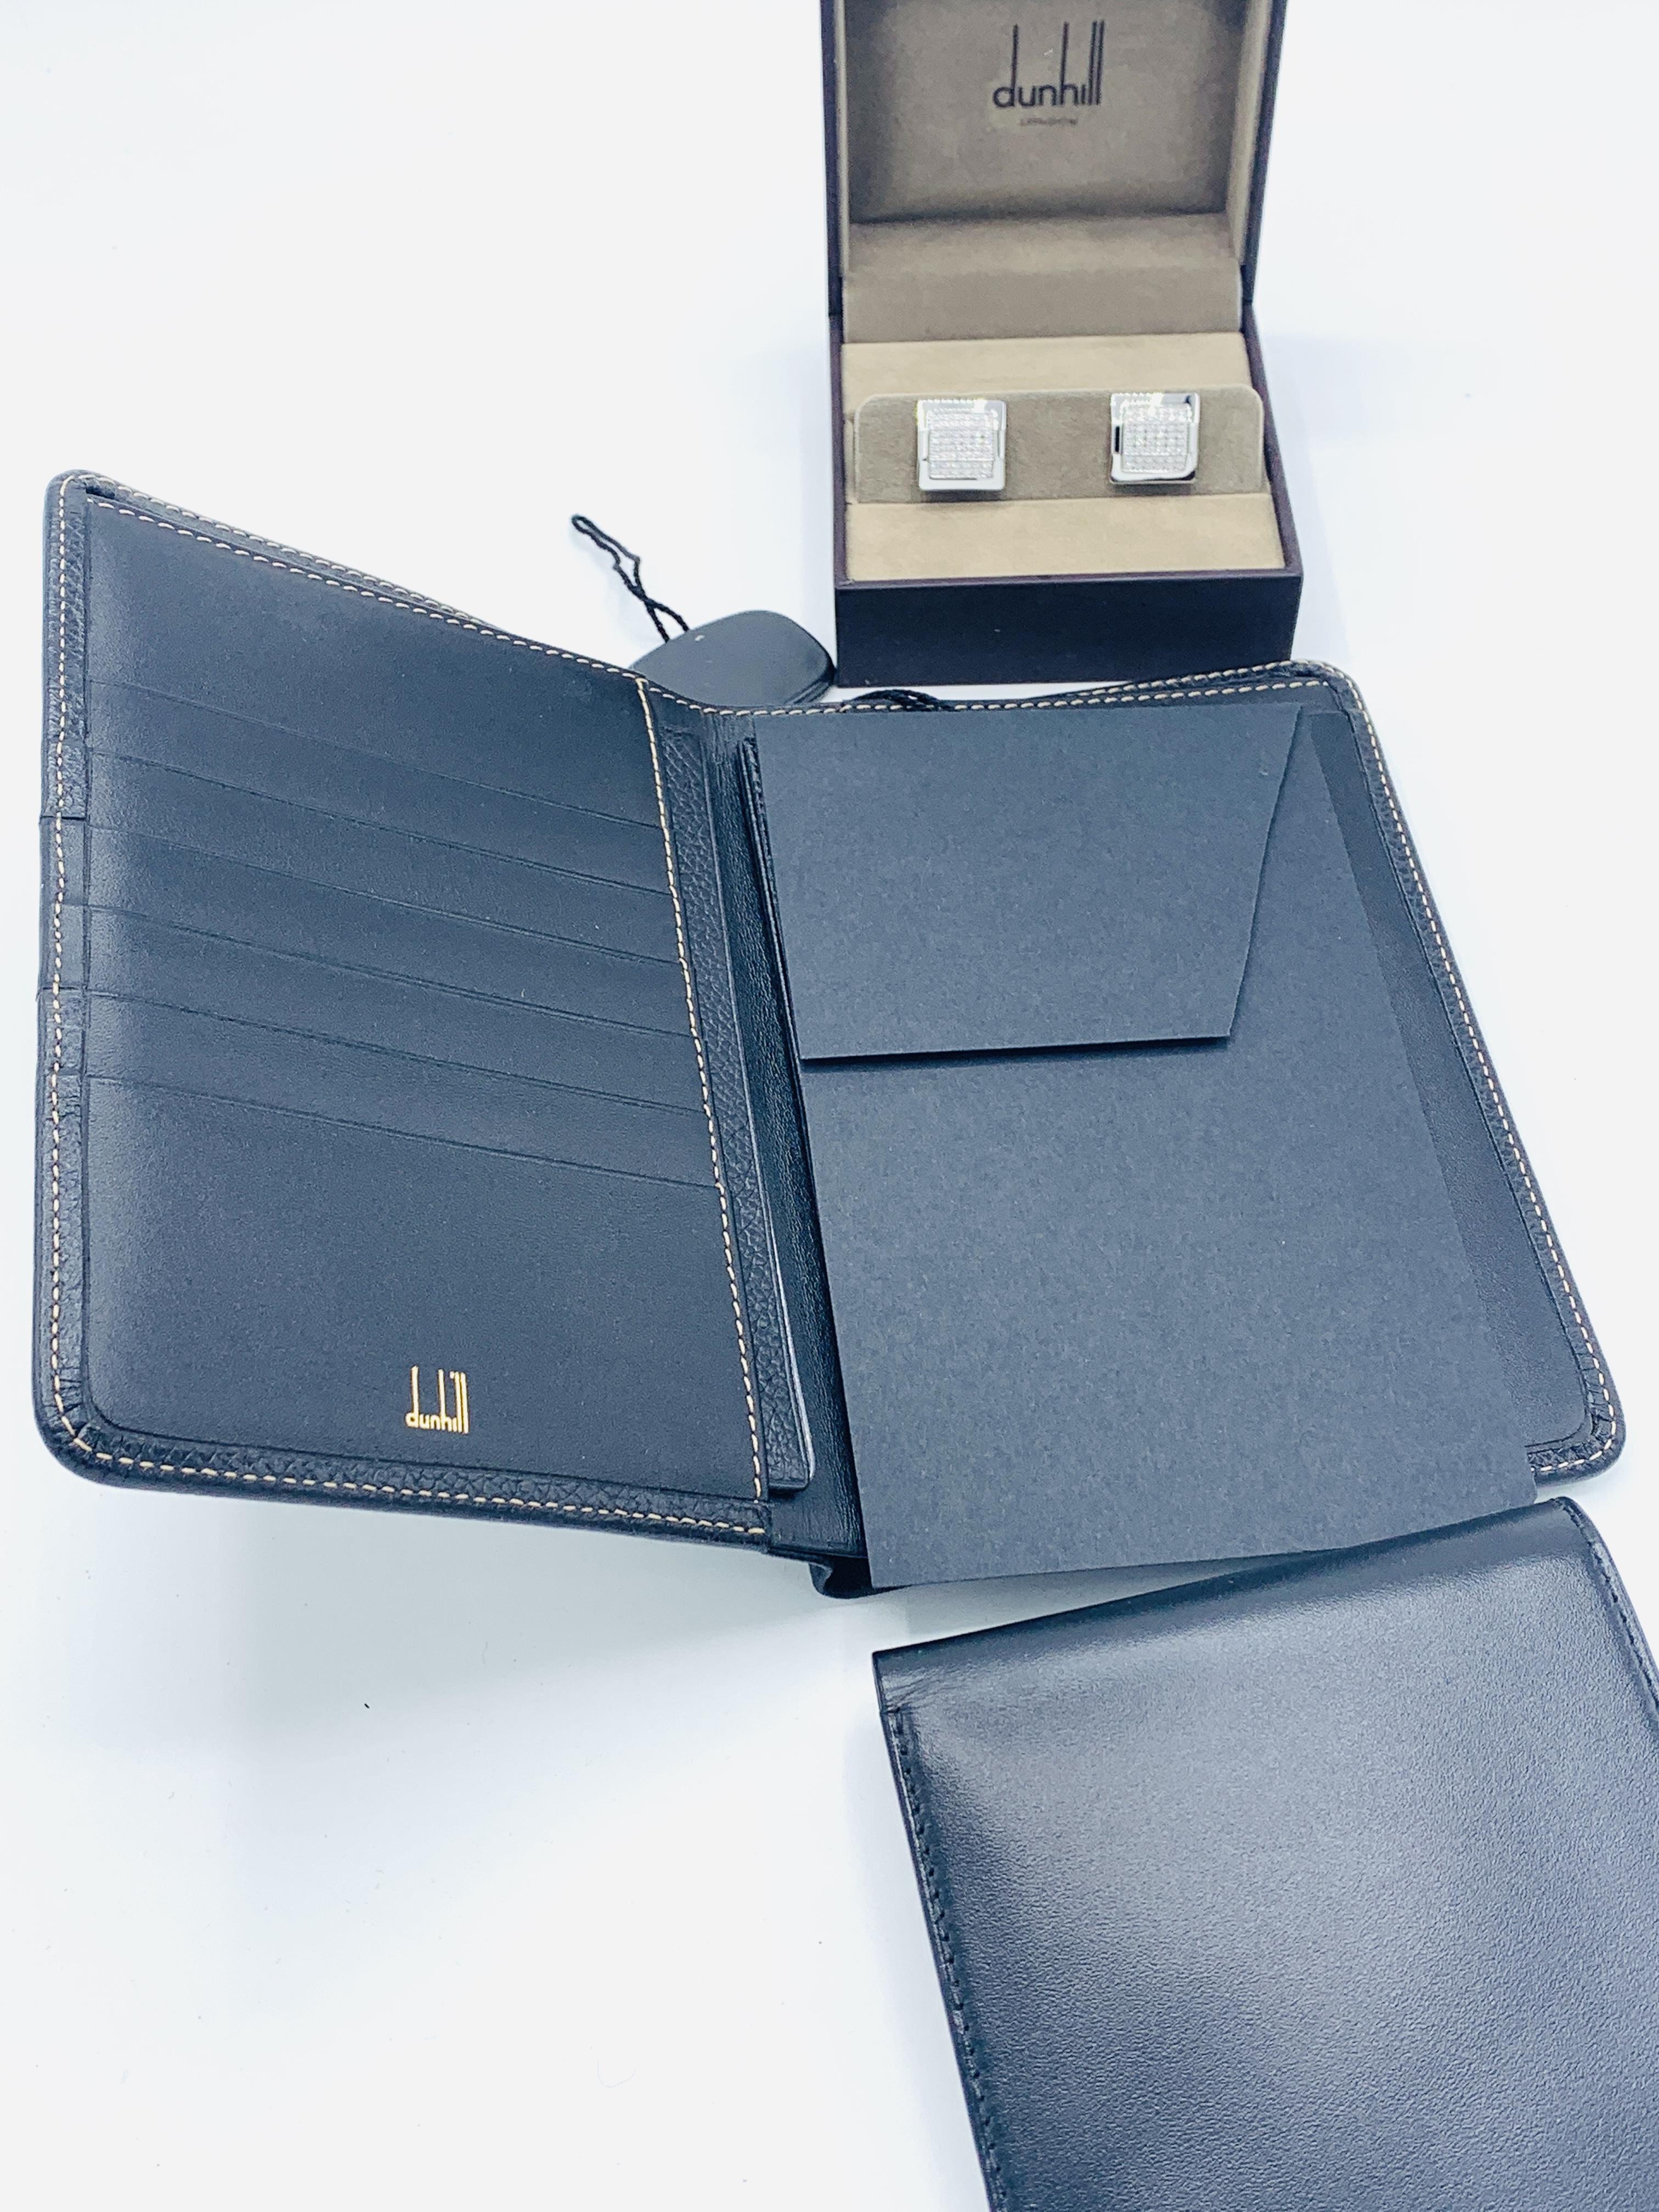 A pair of Dunhill cufflinks and two Dunhill black leather wallets - Image 2 of 4